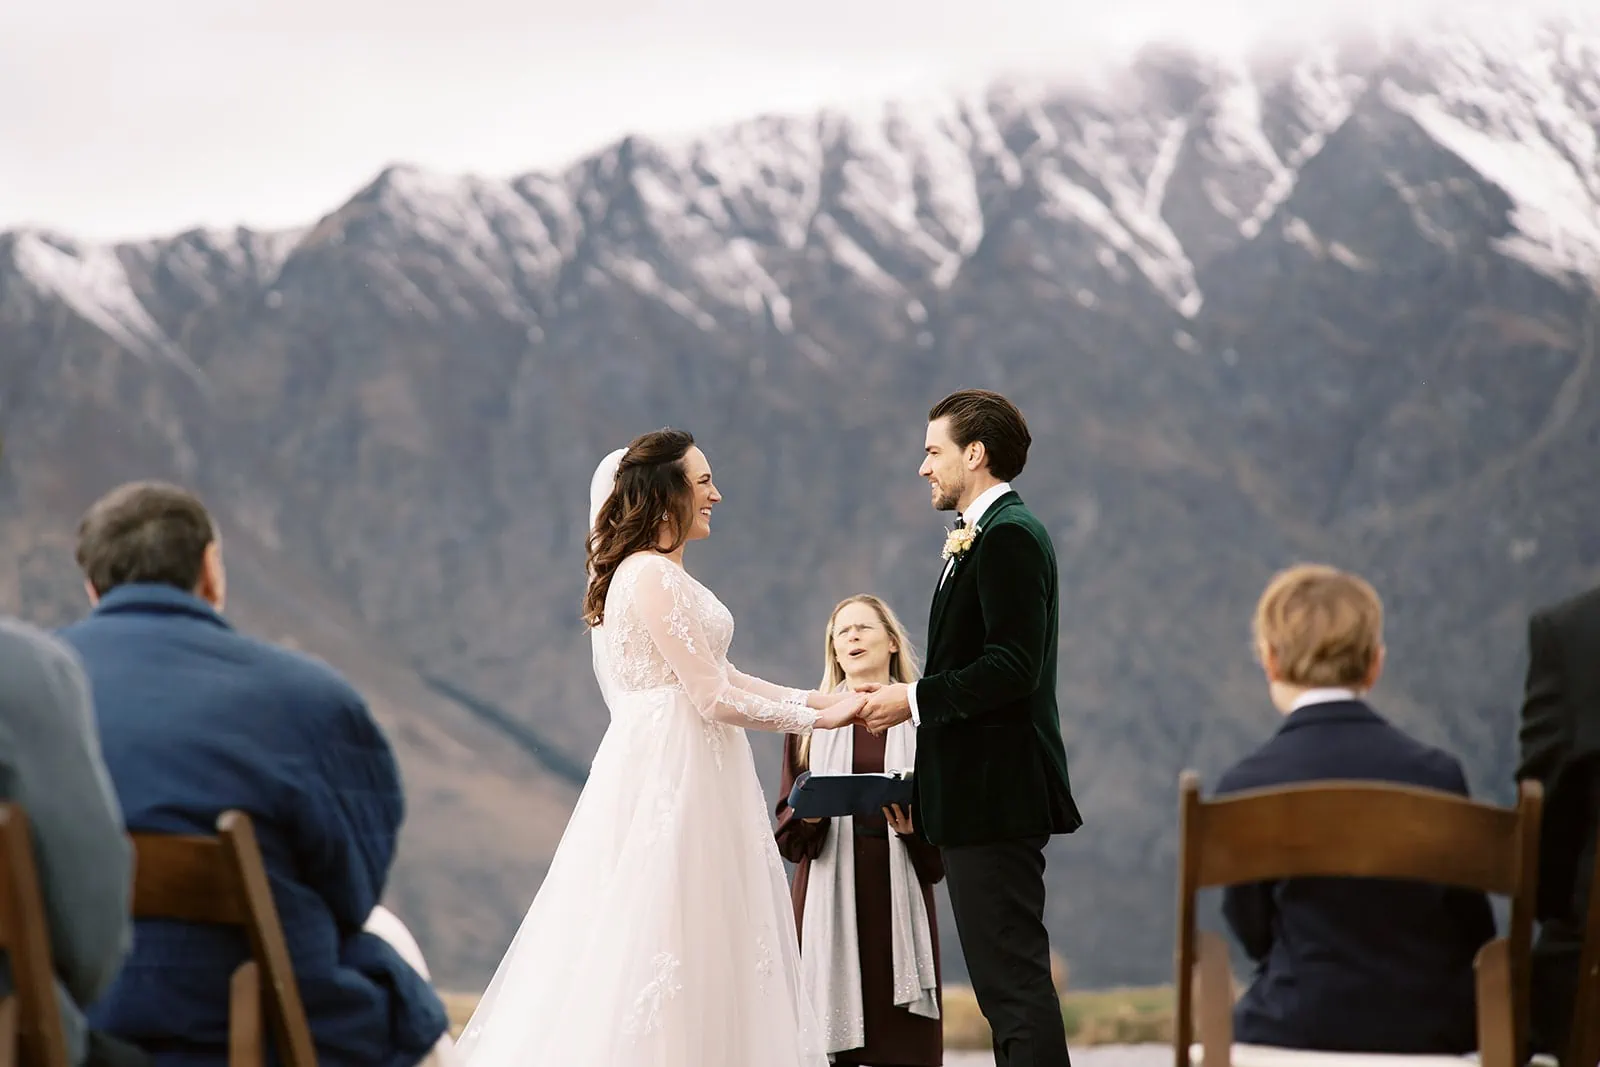 Queenstown Wedding Photographer Nat & Tim, a bride and groom, have their Queenstown EloPement Wedding at Deer Park Heights, exchanging vows in front of majestic mountains.